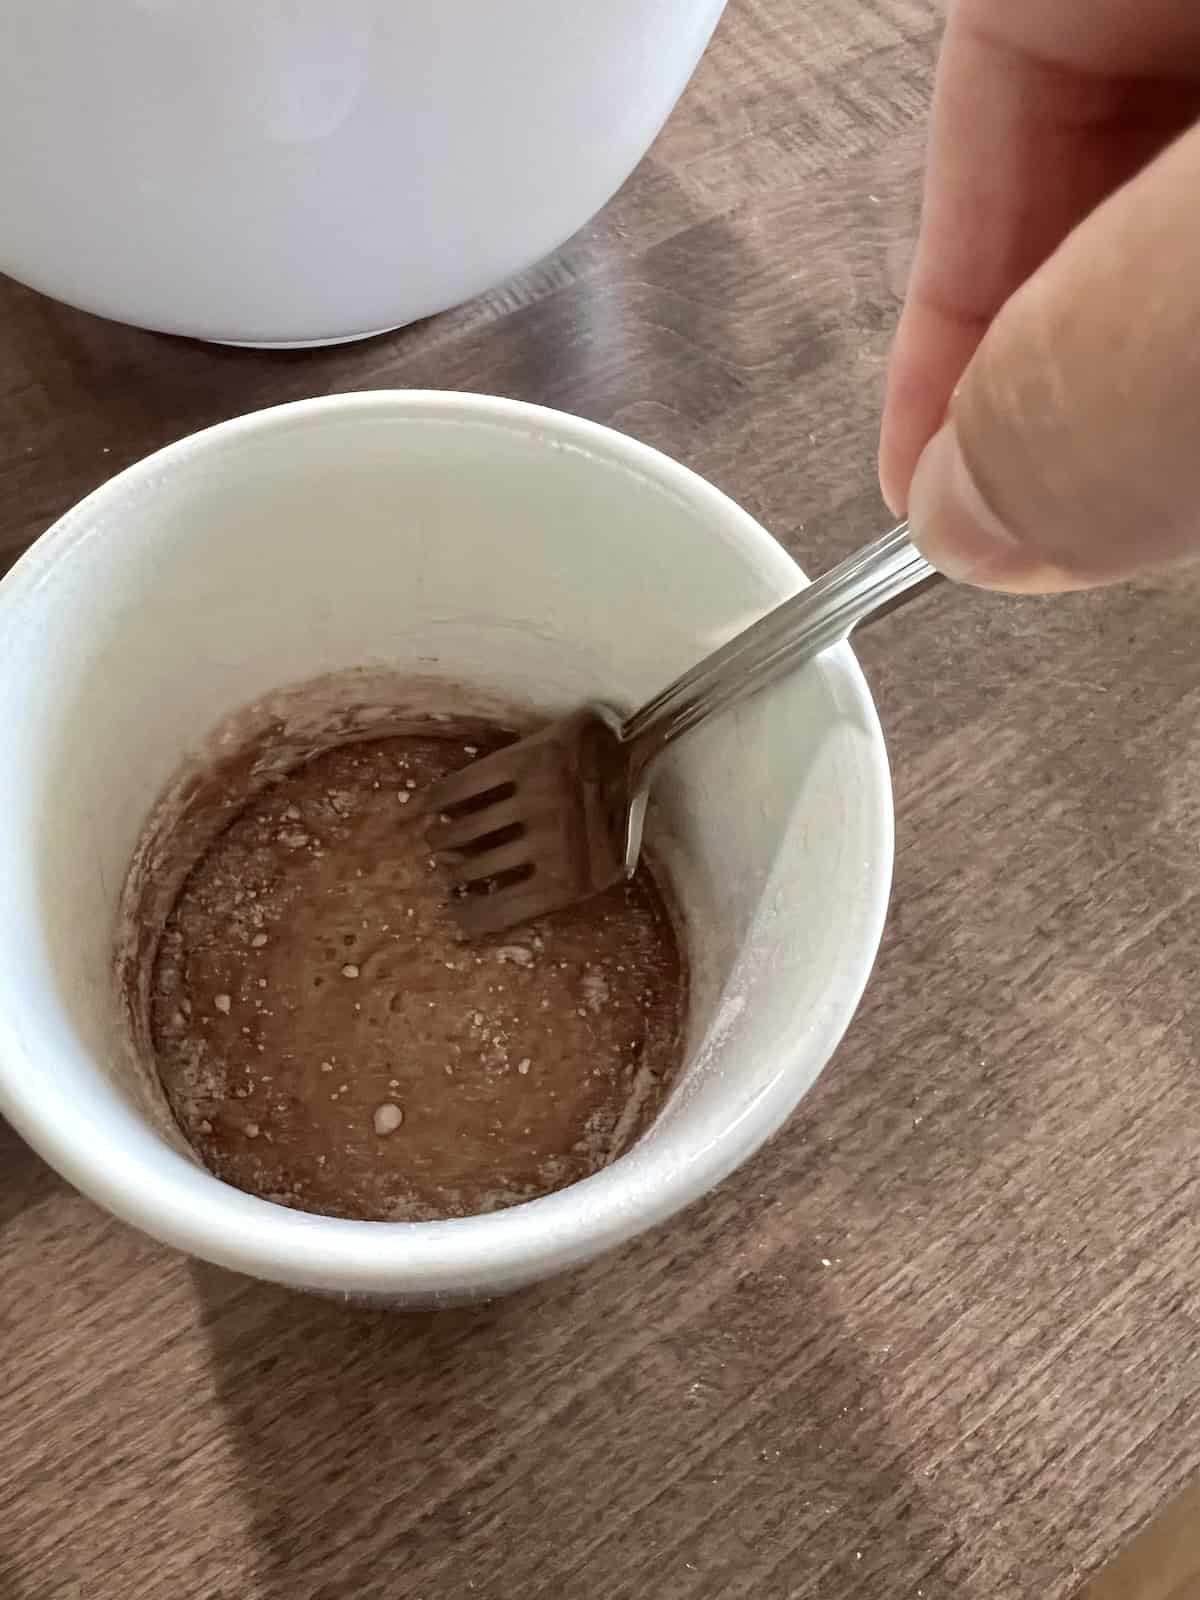 Mixing with a fork